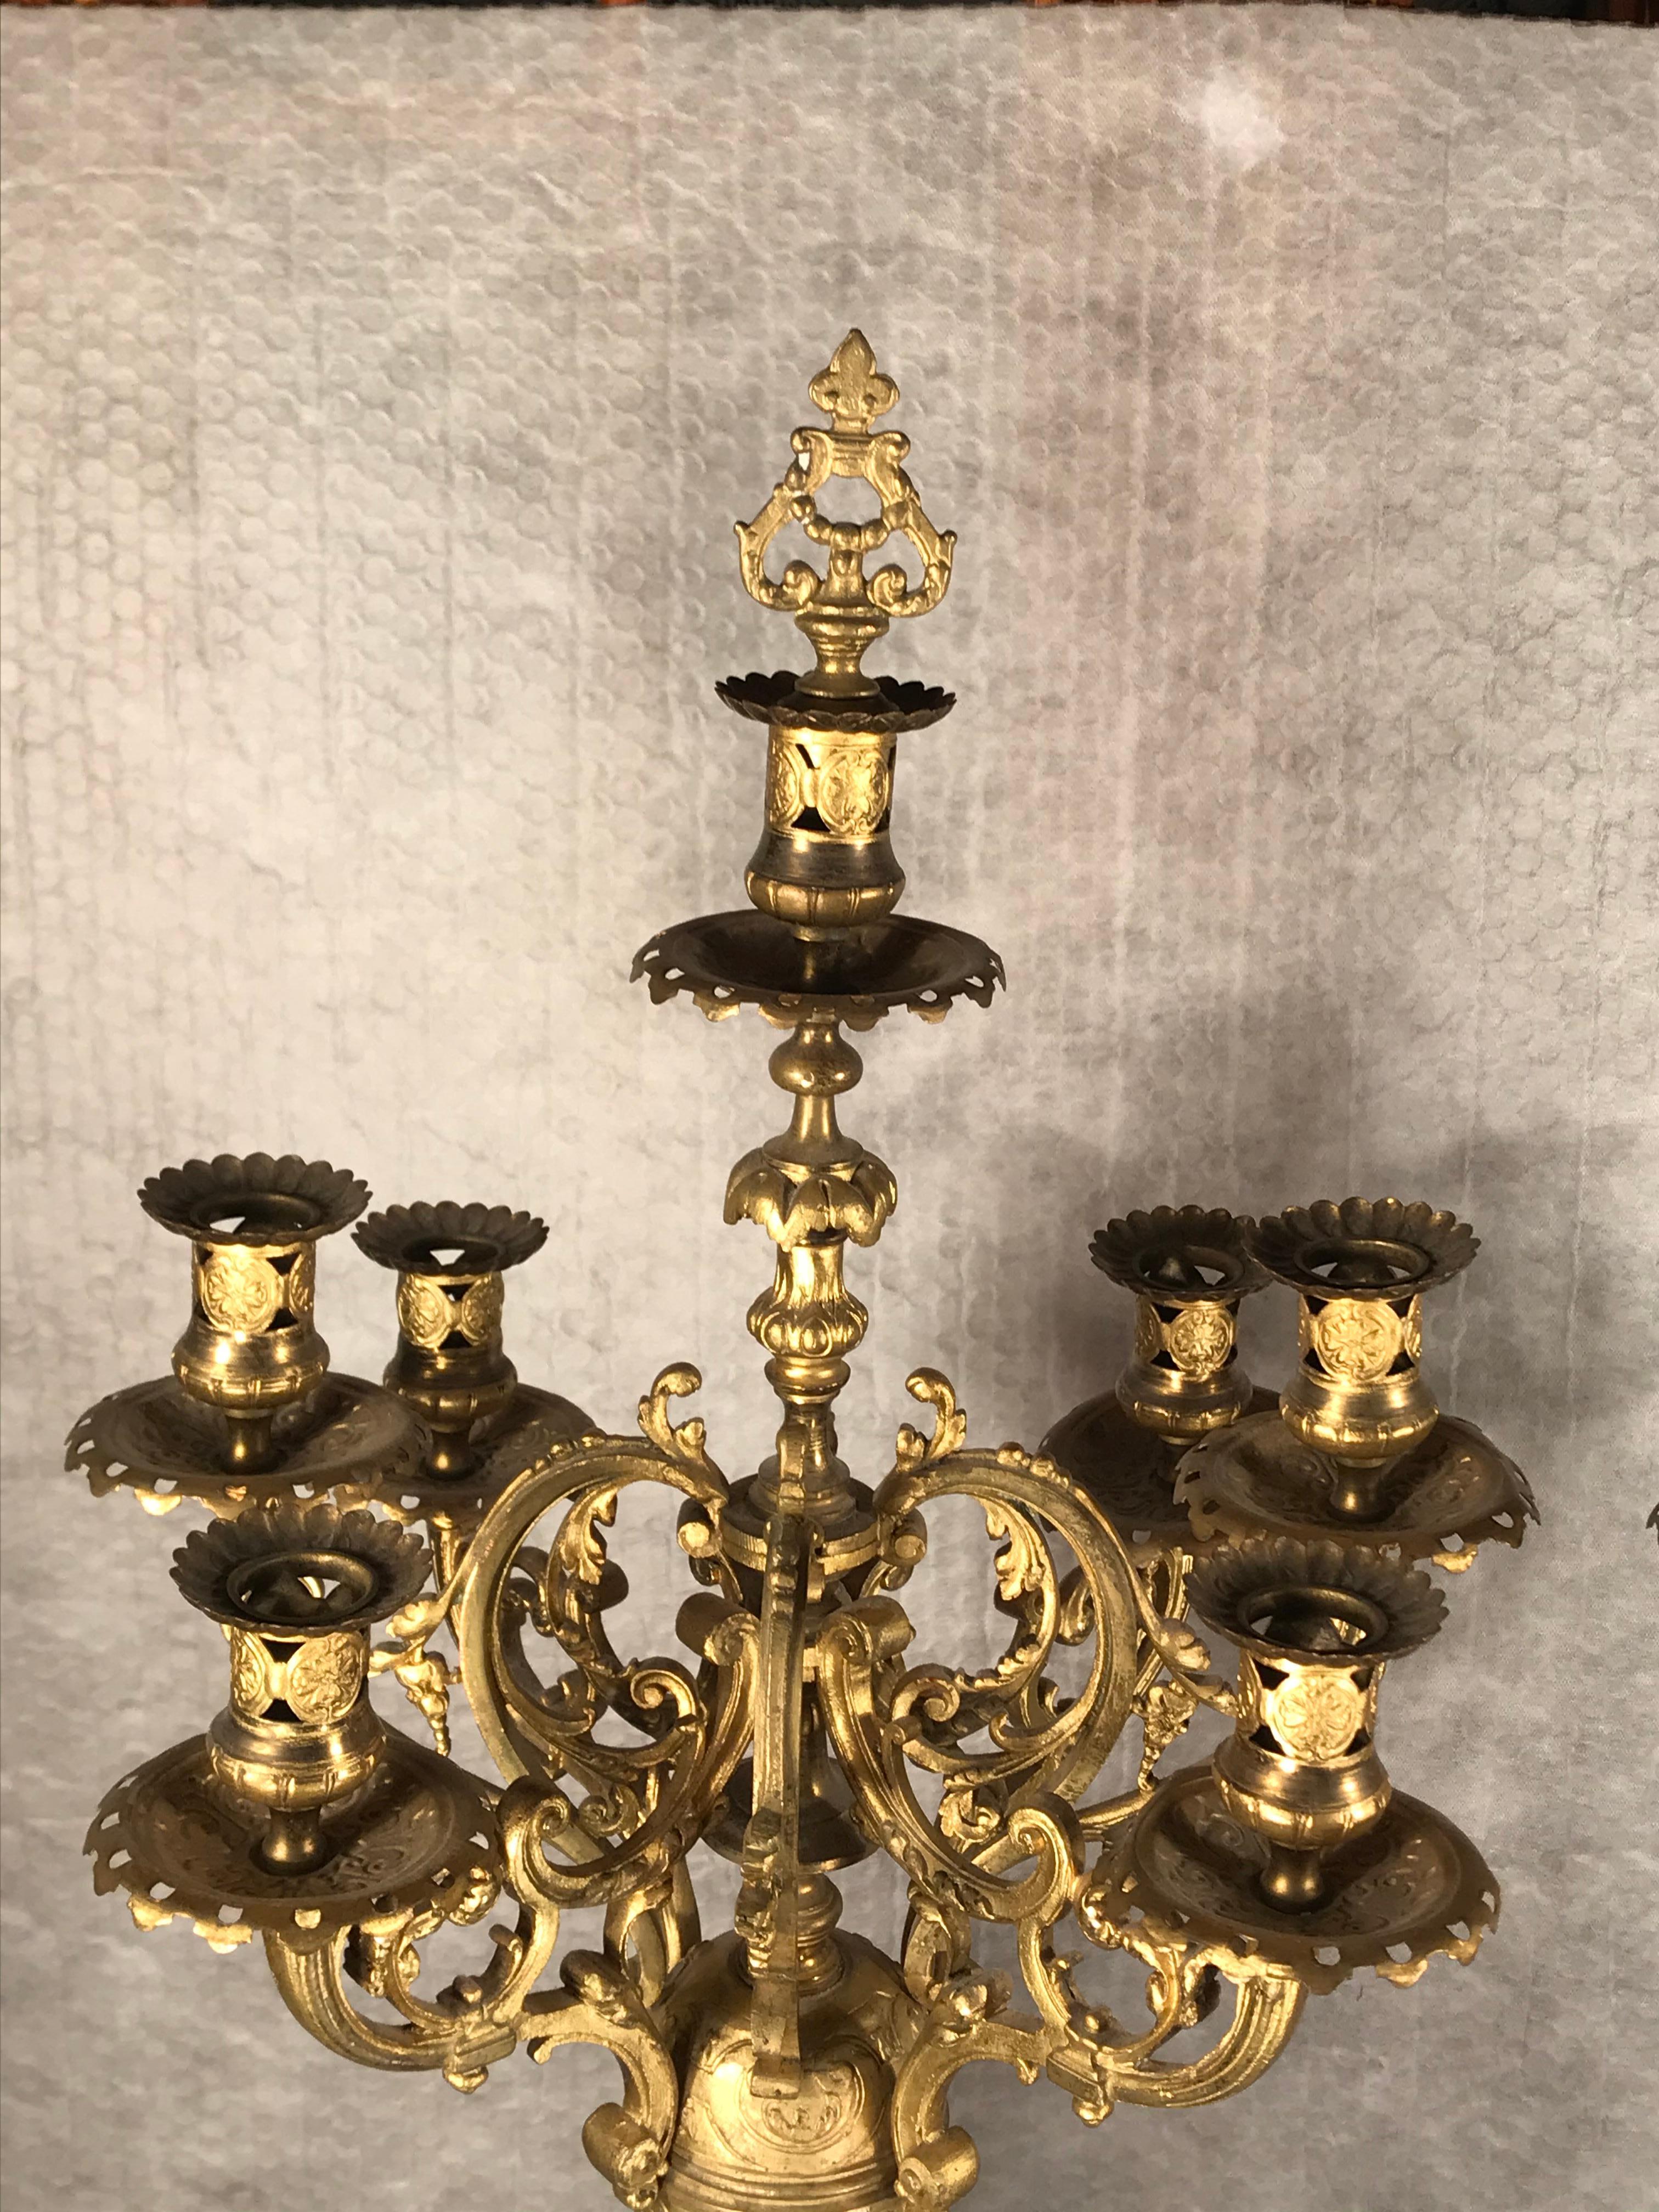 Pair of bronze candelabras, France 19th century. The Historicism candelabras have 7 candleholders. They are decorated with rocaille, latticework and mascaron decor.
They are in very good condition. 
The candelabras are part of a three piece set with